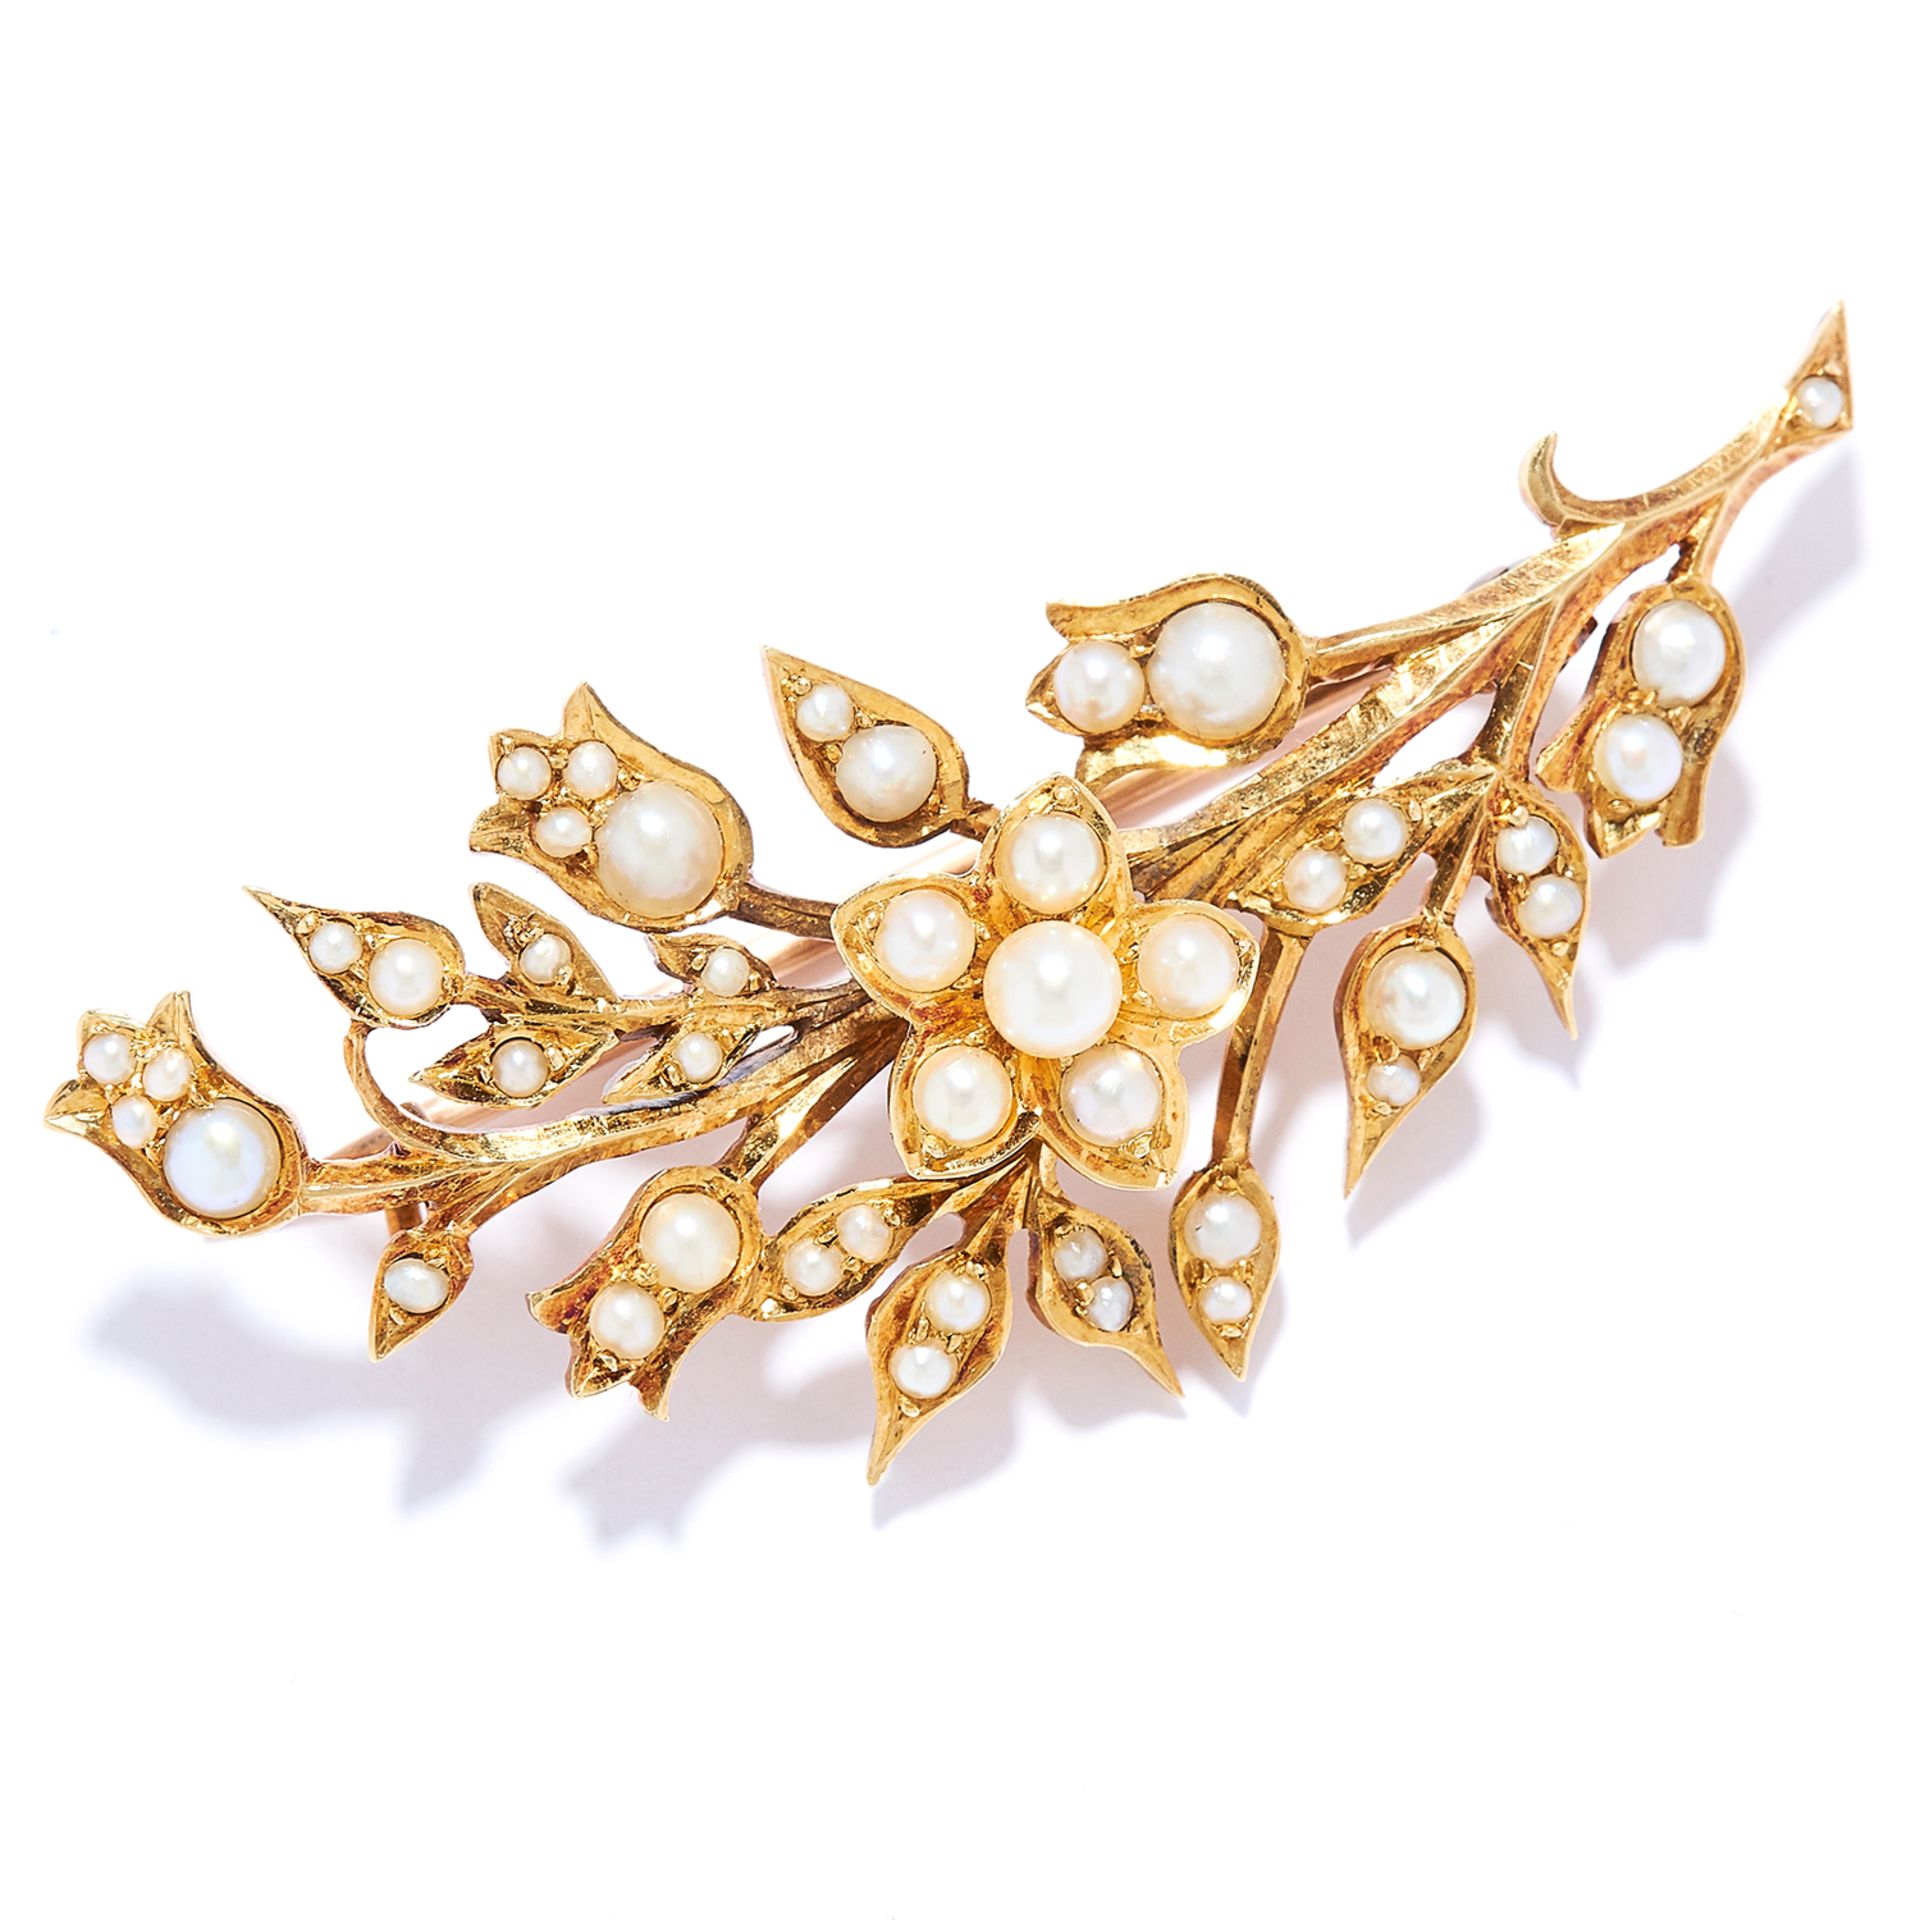 ANTIQUE SEED PEARL BROOCH in 15CT yellow gold, in flower spray motif set with seed pearls, stamped